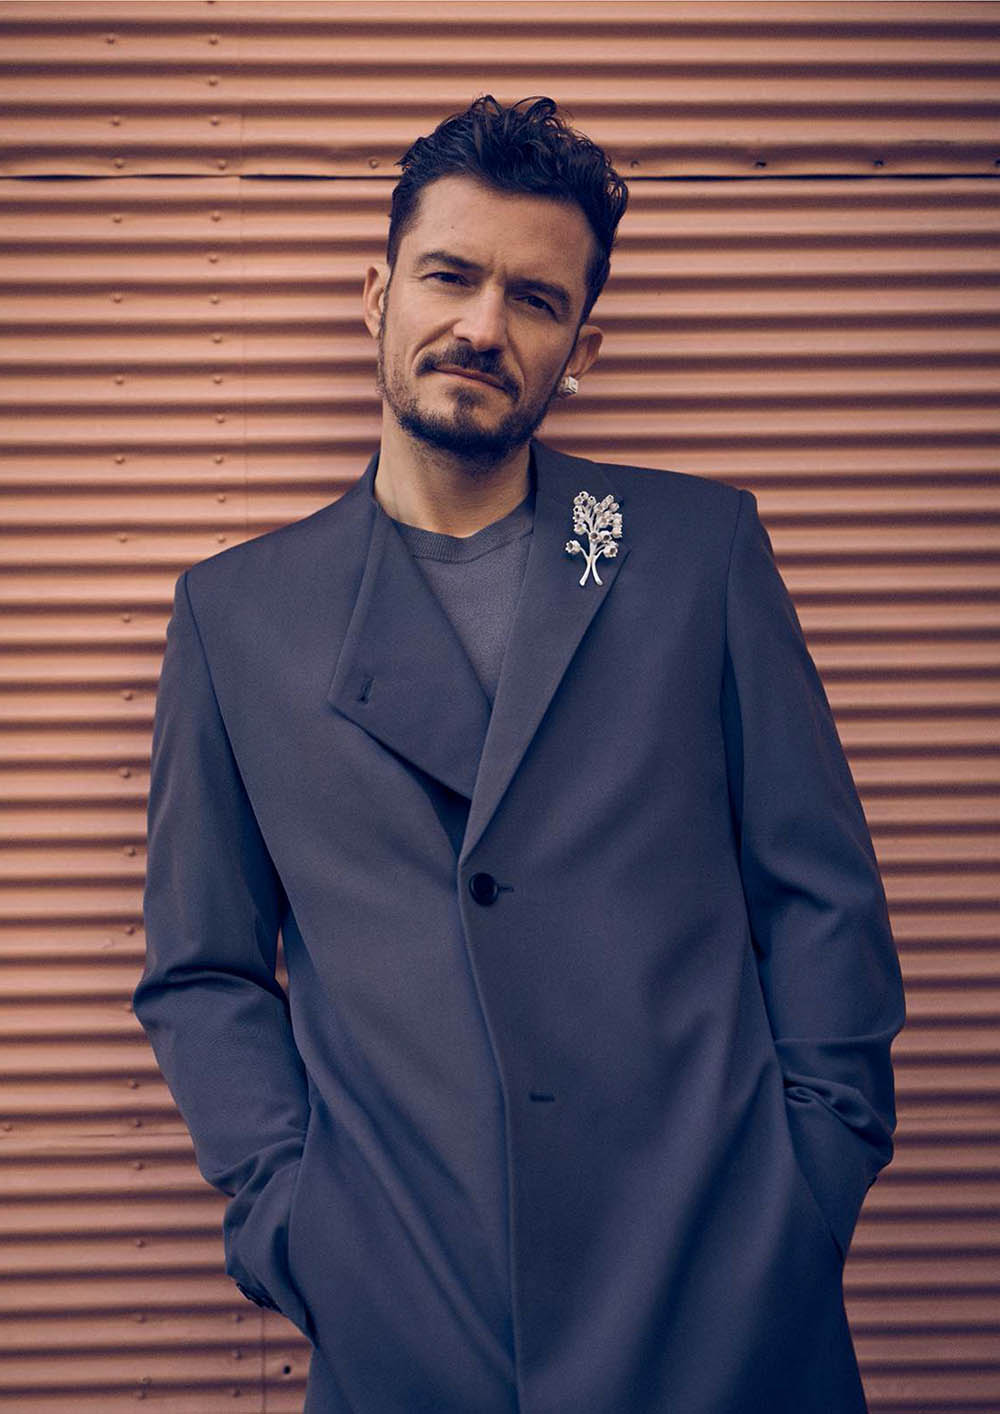 Orlando Bloom covers Esquire Singapore March 2020 by Charlie Gray